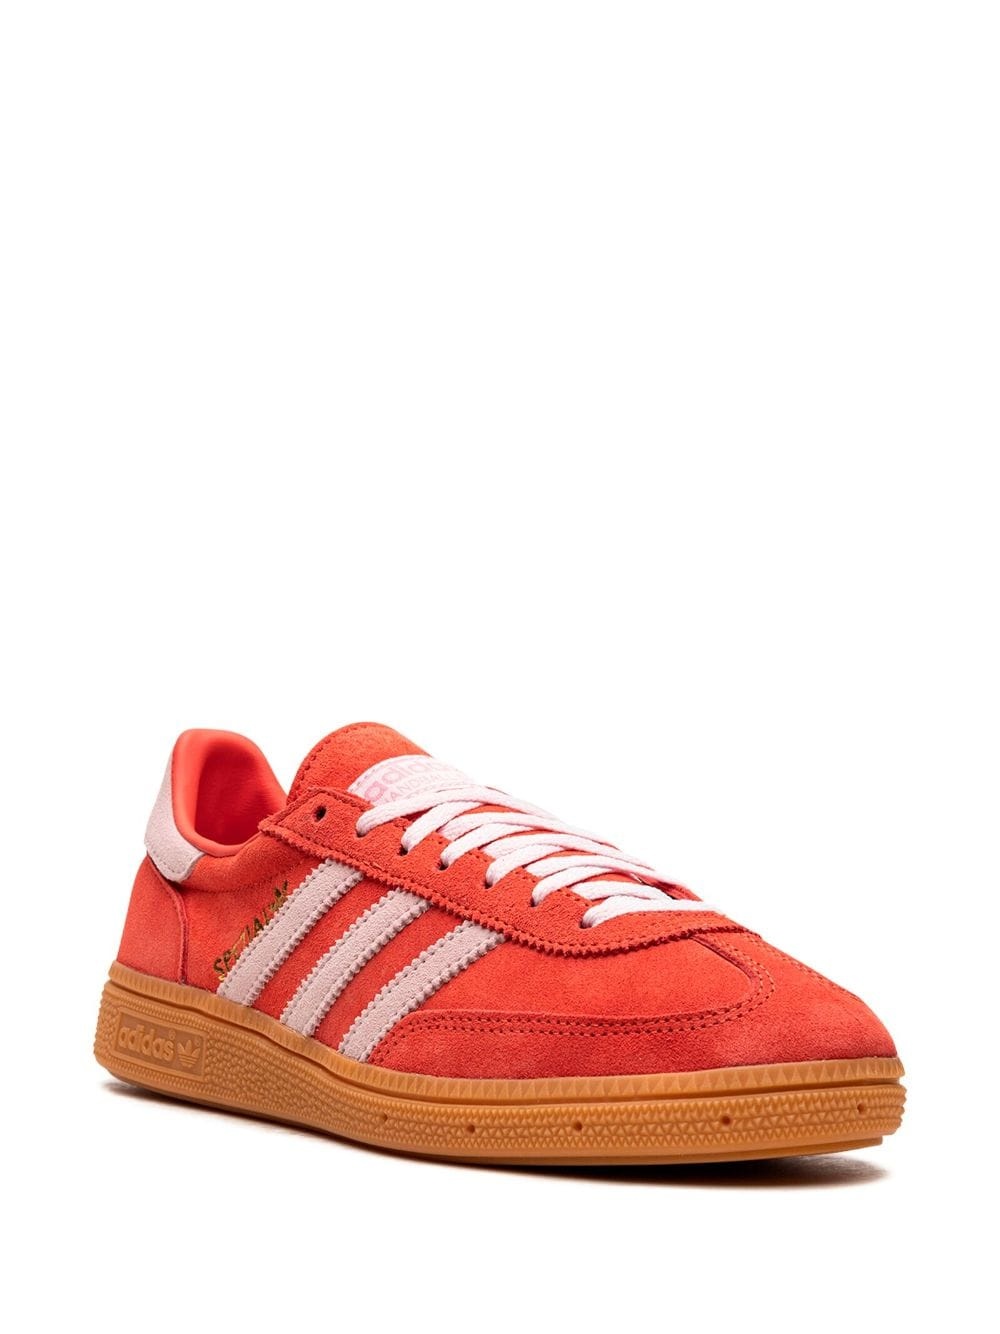 Handball Spezial "Bright Red Clear Pink" sneakers - 2